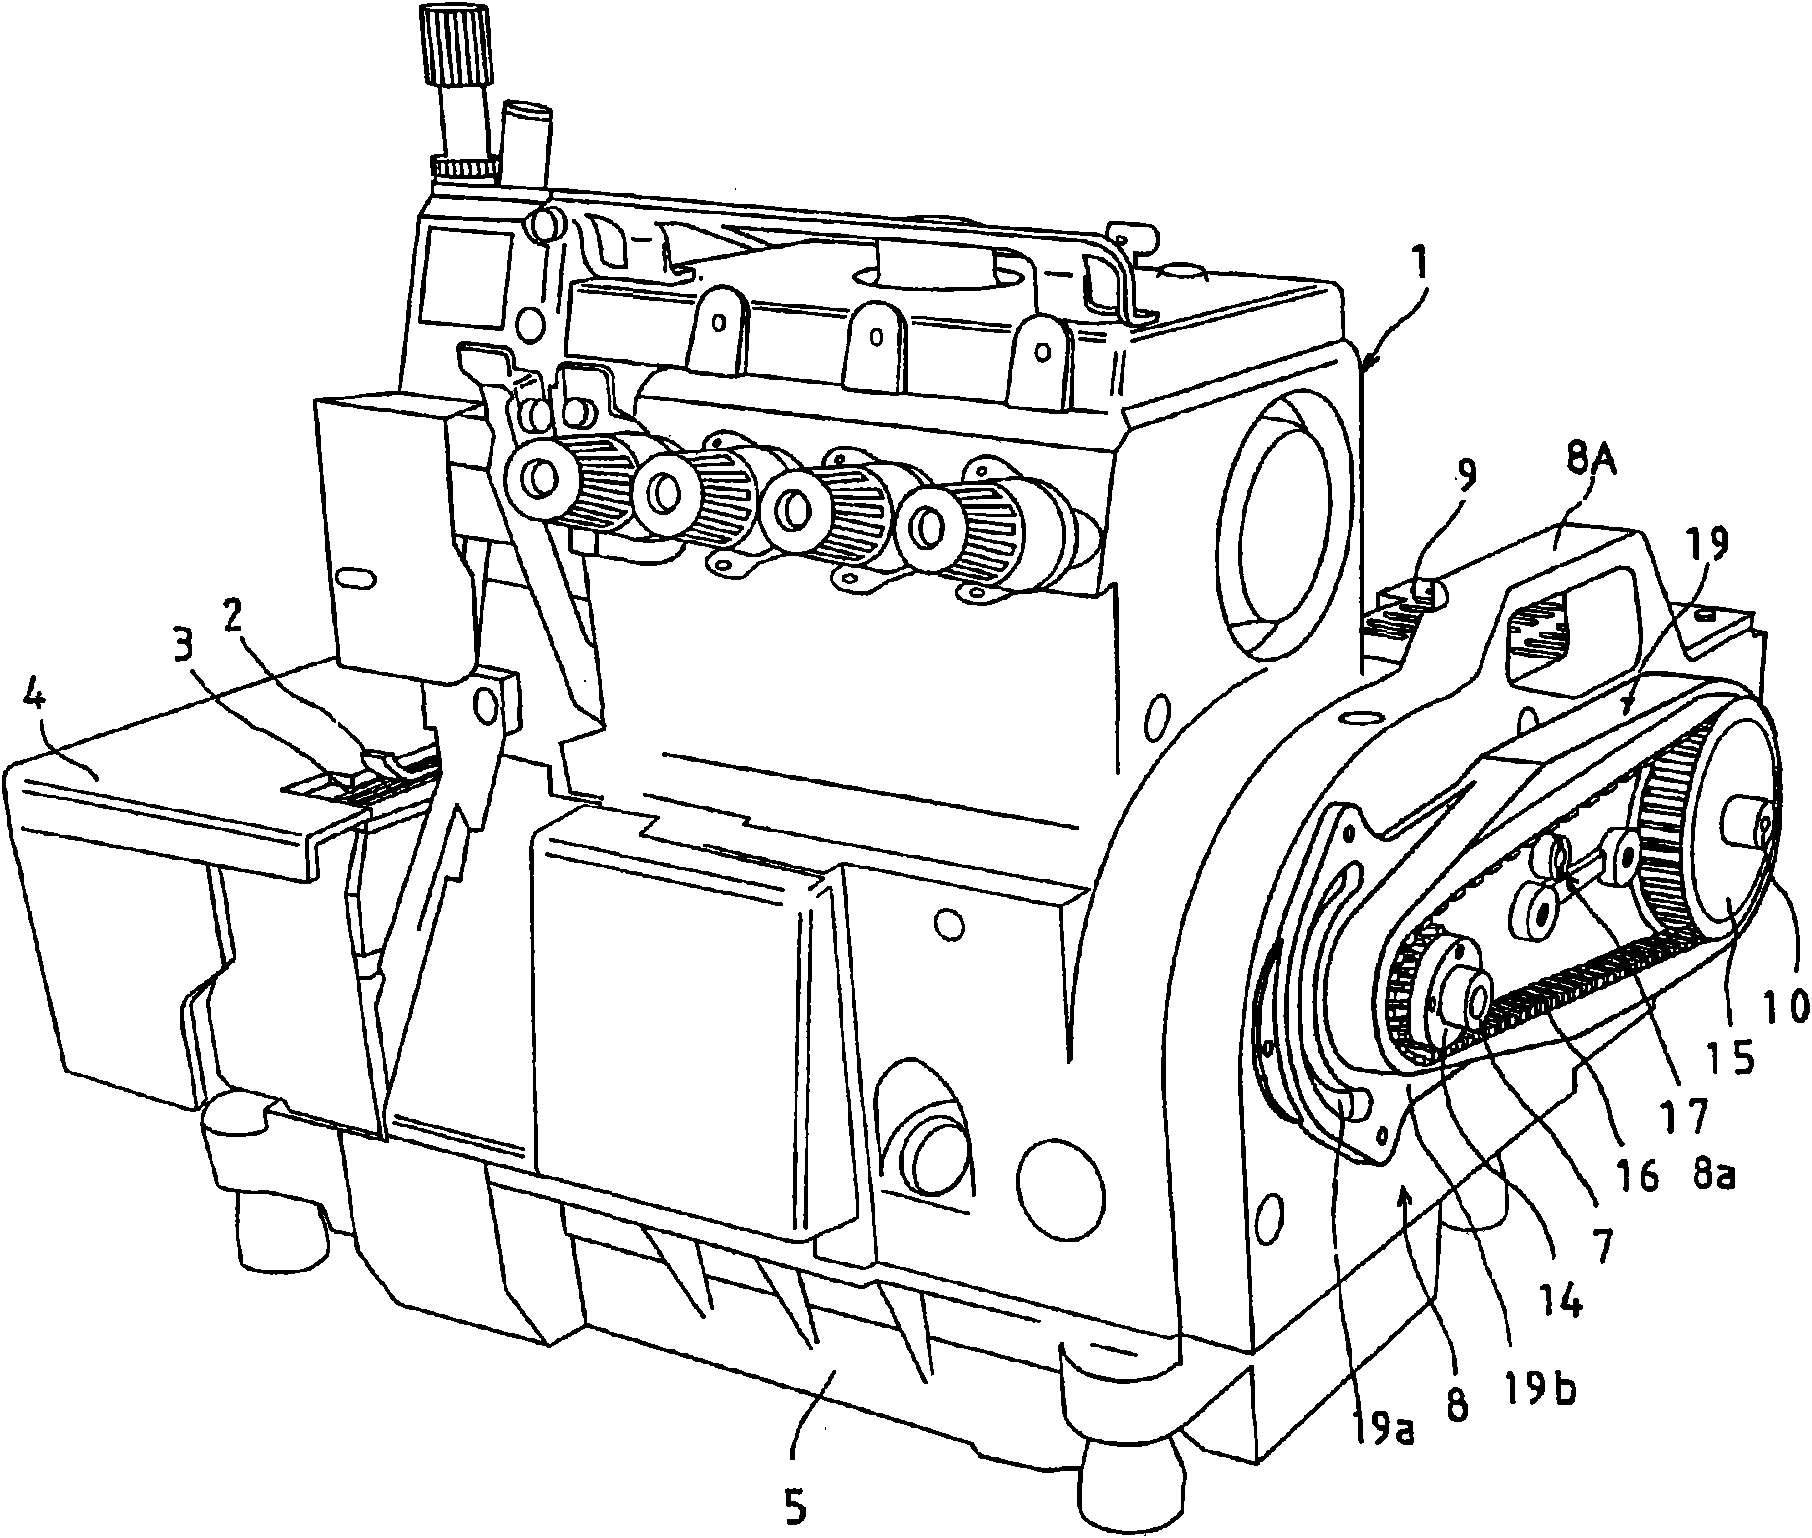 Driving device of industrial sewing machine